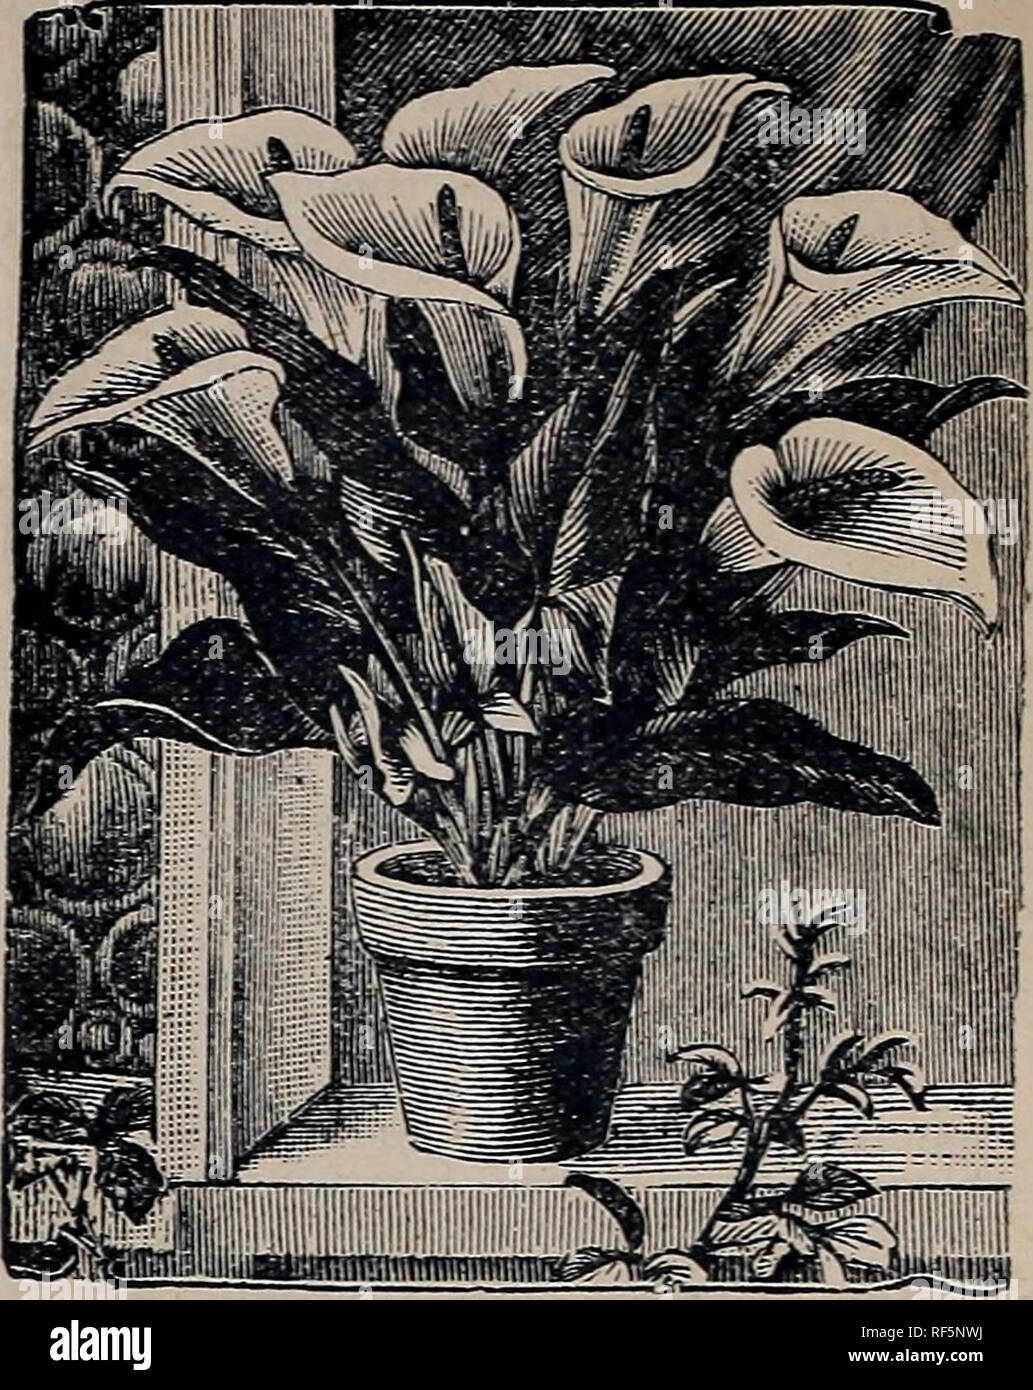 . Dutch bulbs for fall planting : fall wheat &amp;c. 1902. Nursery stock Ontario Toronto Catalogs; Flowers Seeds Catalogs; Plants, Ornamental Catalogs; Bulbs (Plants) Catalogs; Cereal grasses Catalogs. SPOTTED LEAF CALLA New Sweet Scented &quot;CALLA FRAGRANCE&quot; The Fragrance of Violets and Lilies. 269 In this we have not only a charming and useful flower produced in a profusion never before surpassed, if equalled, in a Calla, but also with a genuine, sweet, lasting fragrance all its own, yet similar to that of violets and lilies, which has never before been obtained in Callas. Flower is o Stock Photo